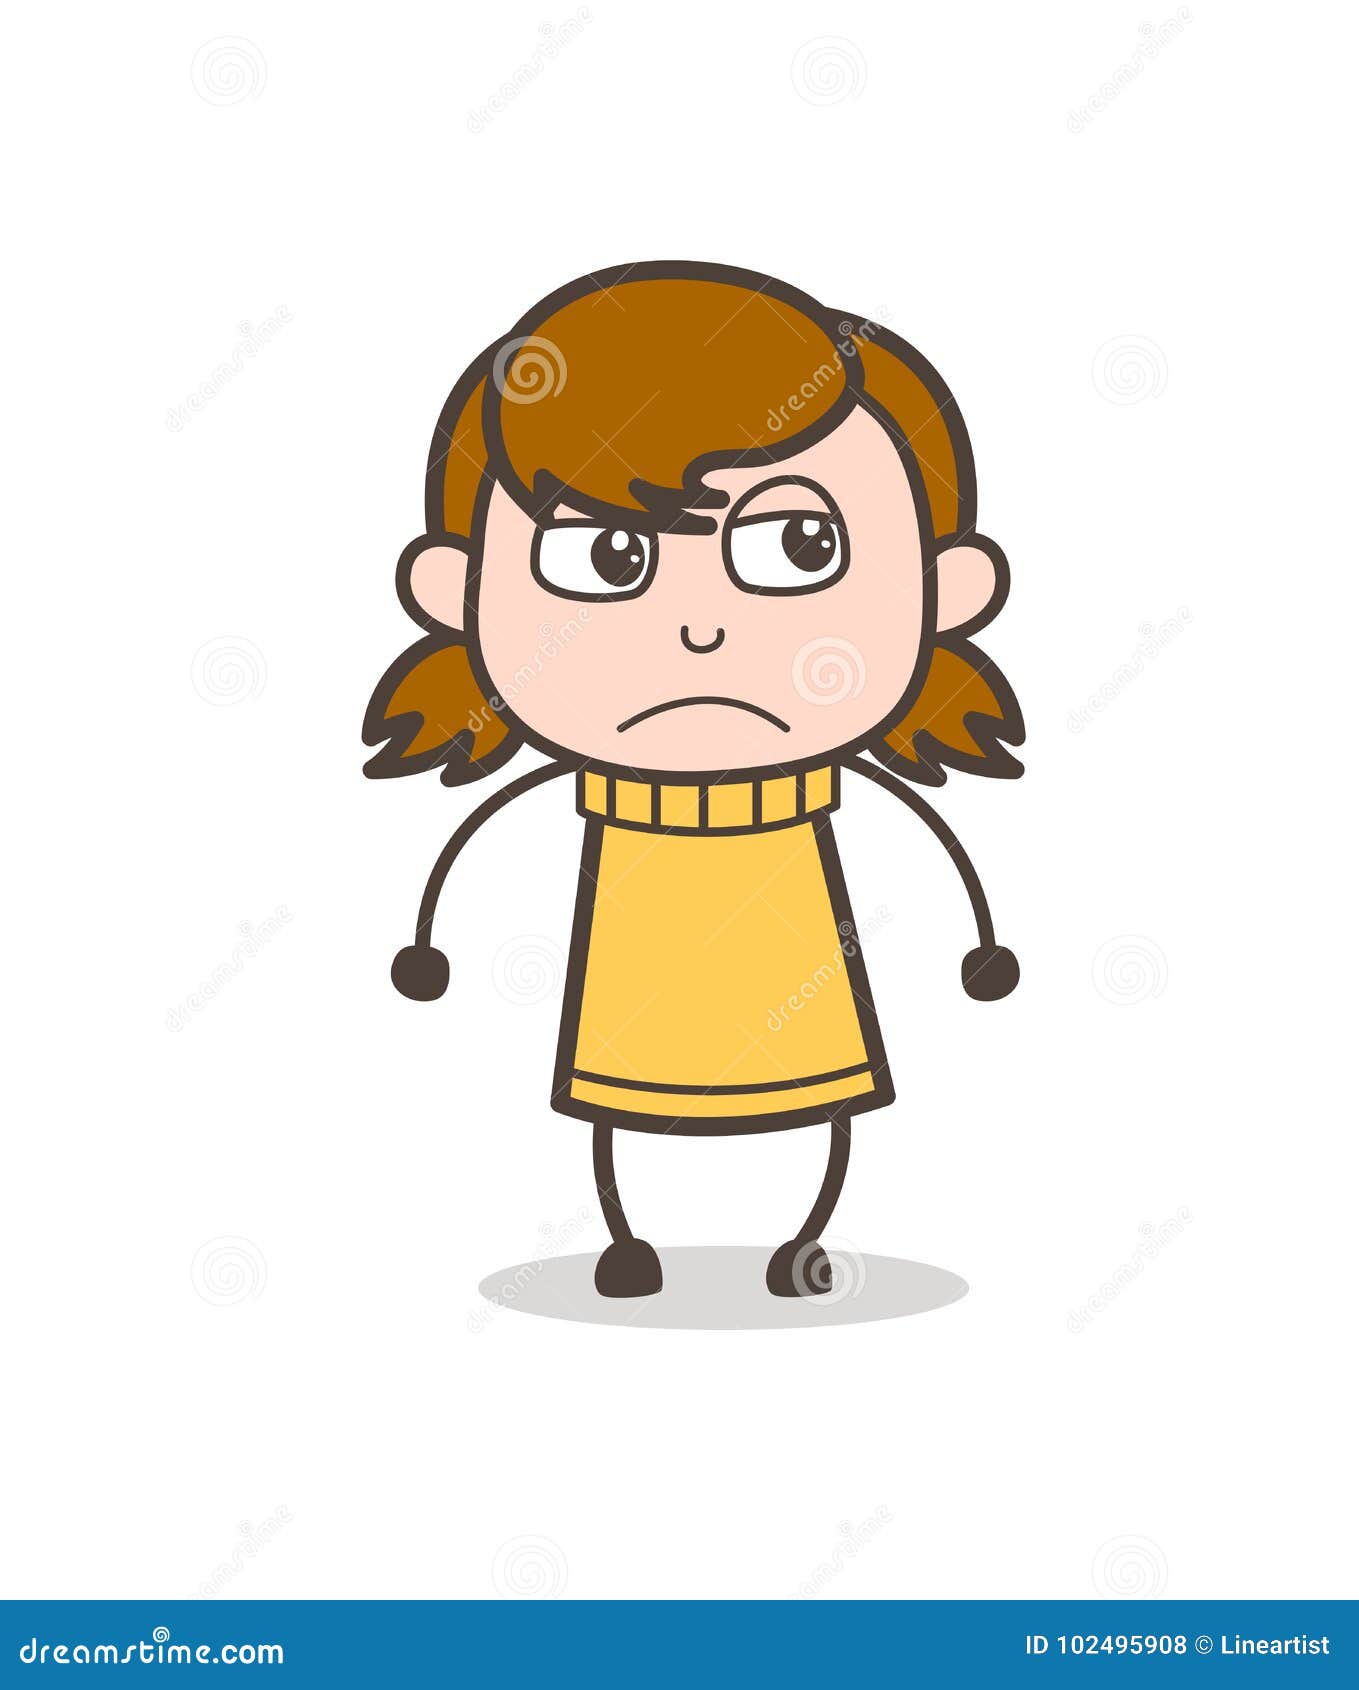 Upset and Frowning Face - Cute Cartoon Girl Illustration Stock ...